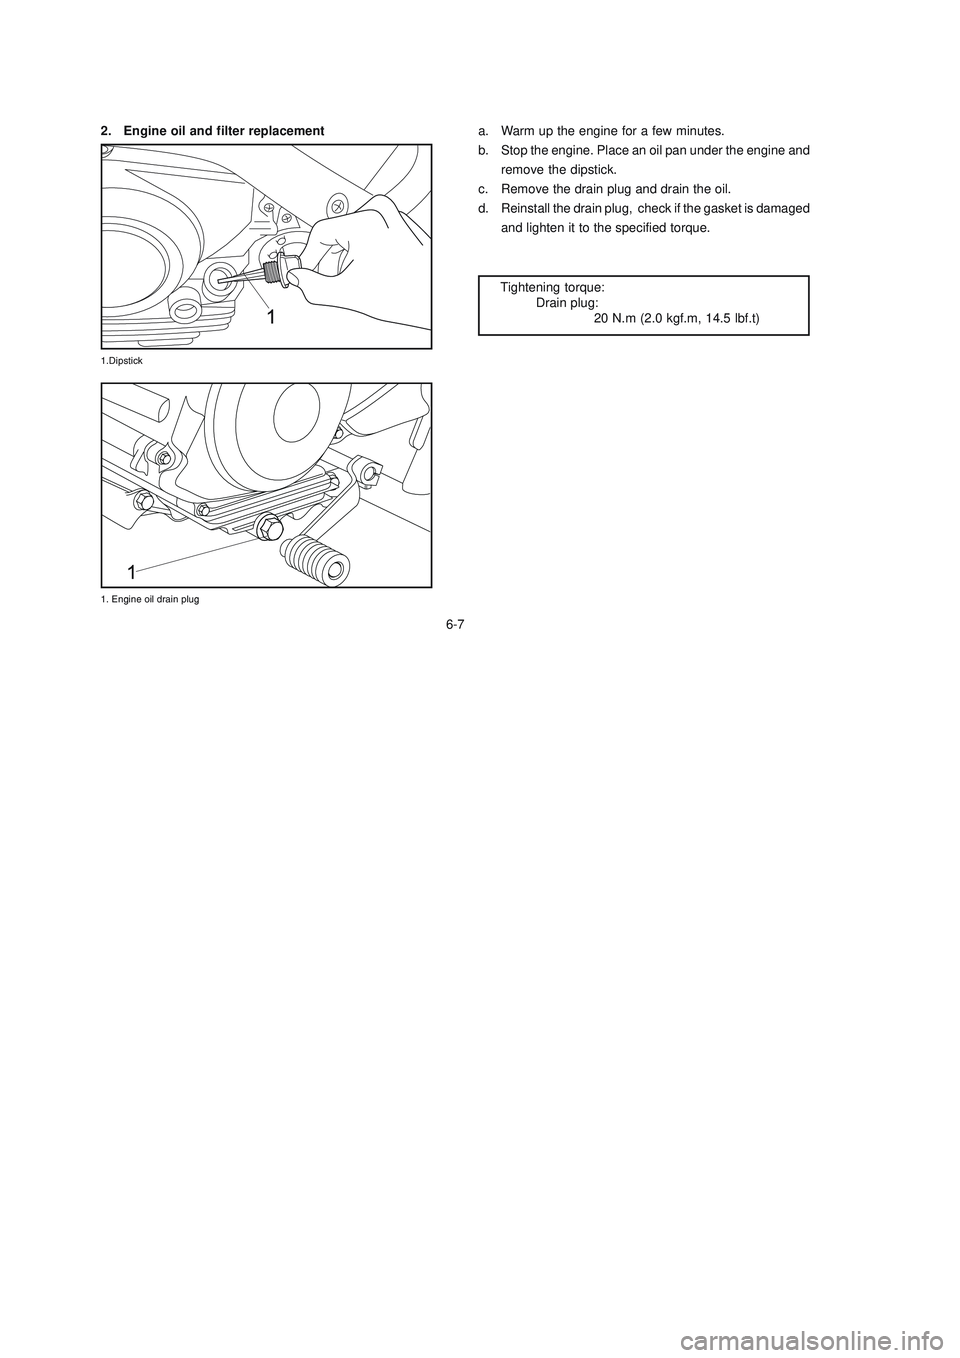 YAMAHA XTZ125 2008  Owners Manual 6-7
6-7
a. Warm up the engine for a few minutes.
b. Stop the engine. Place an oil pan under the engine and
remove the dipstick.
c. Remove the drain plug and drain the oil.
d. Reinstall the drain plug,